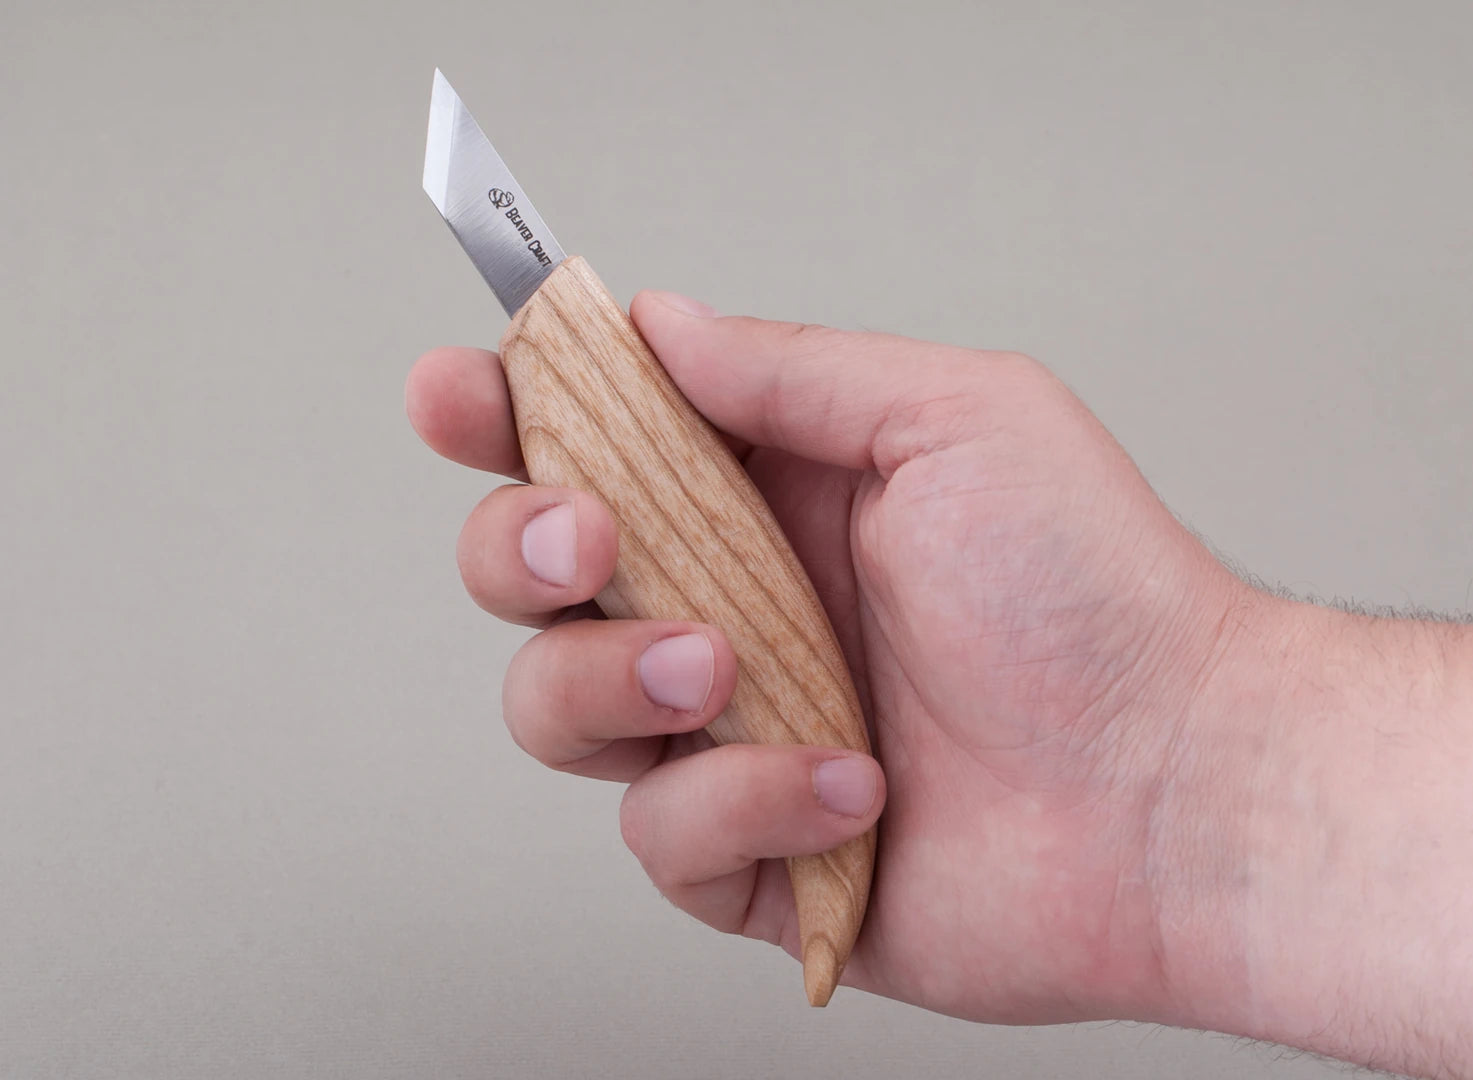 Chip Carving on wooden knife handles - My Chip Carving